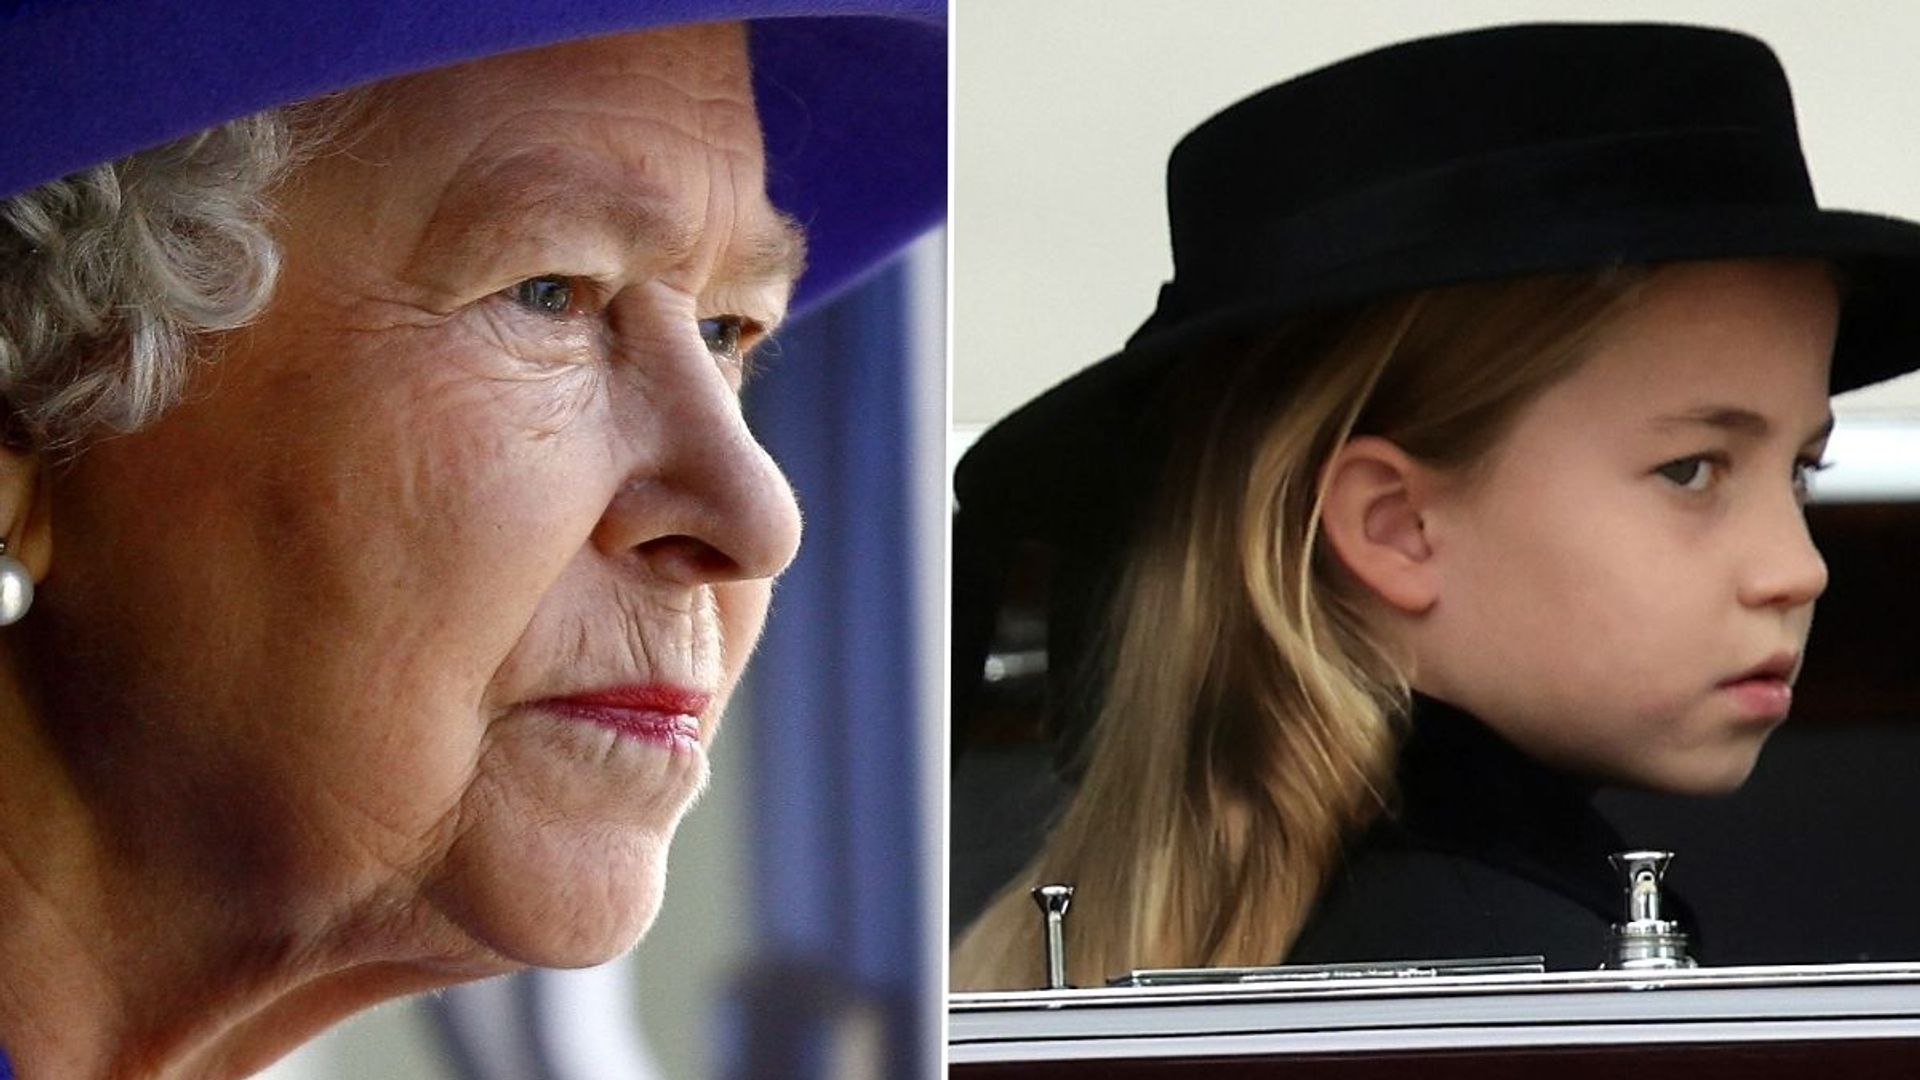 Queen Elizabeth II and Princess Charlotte looking serious